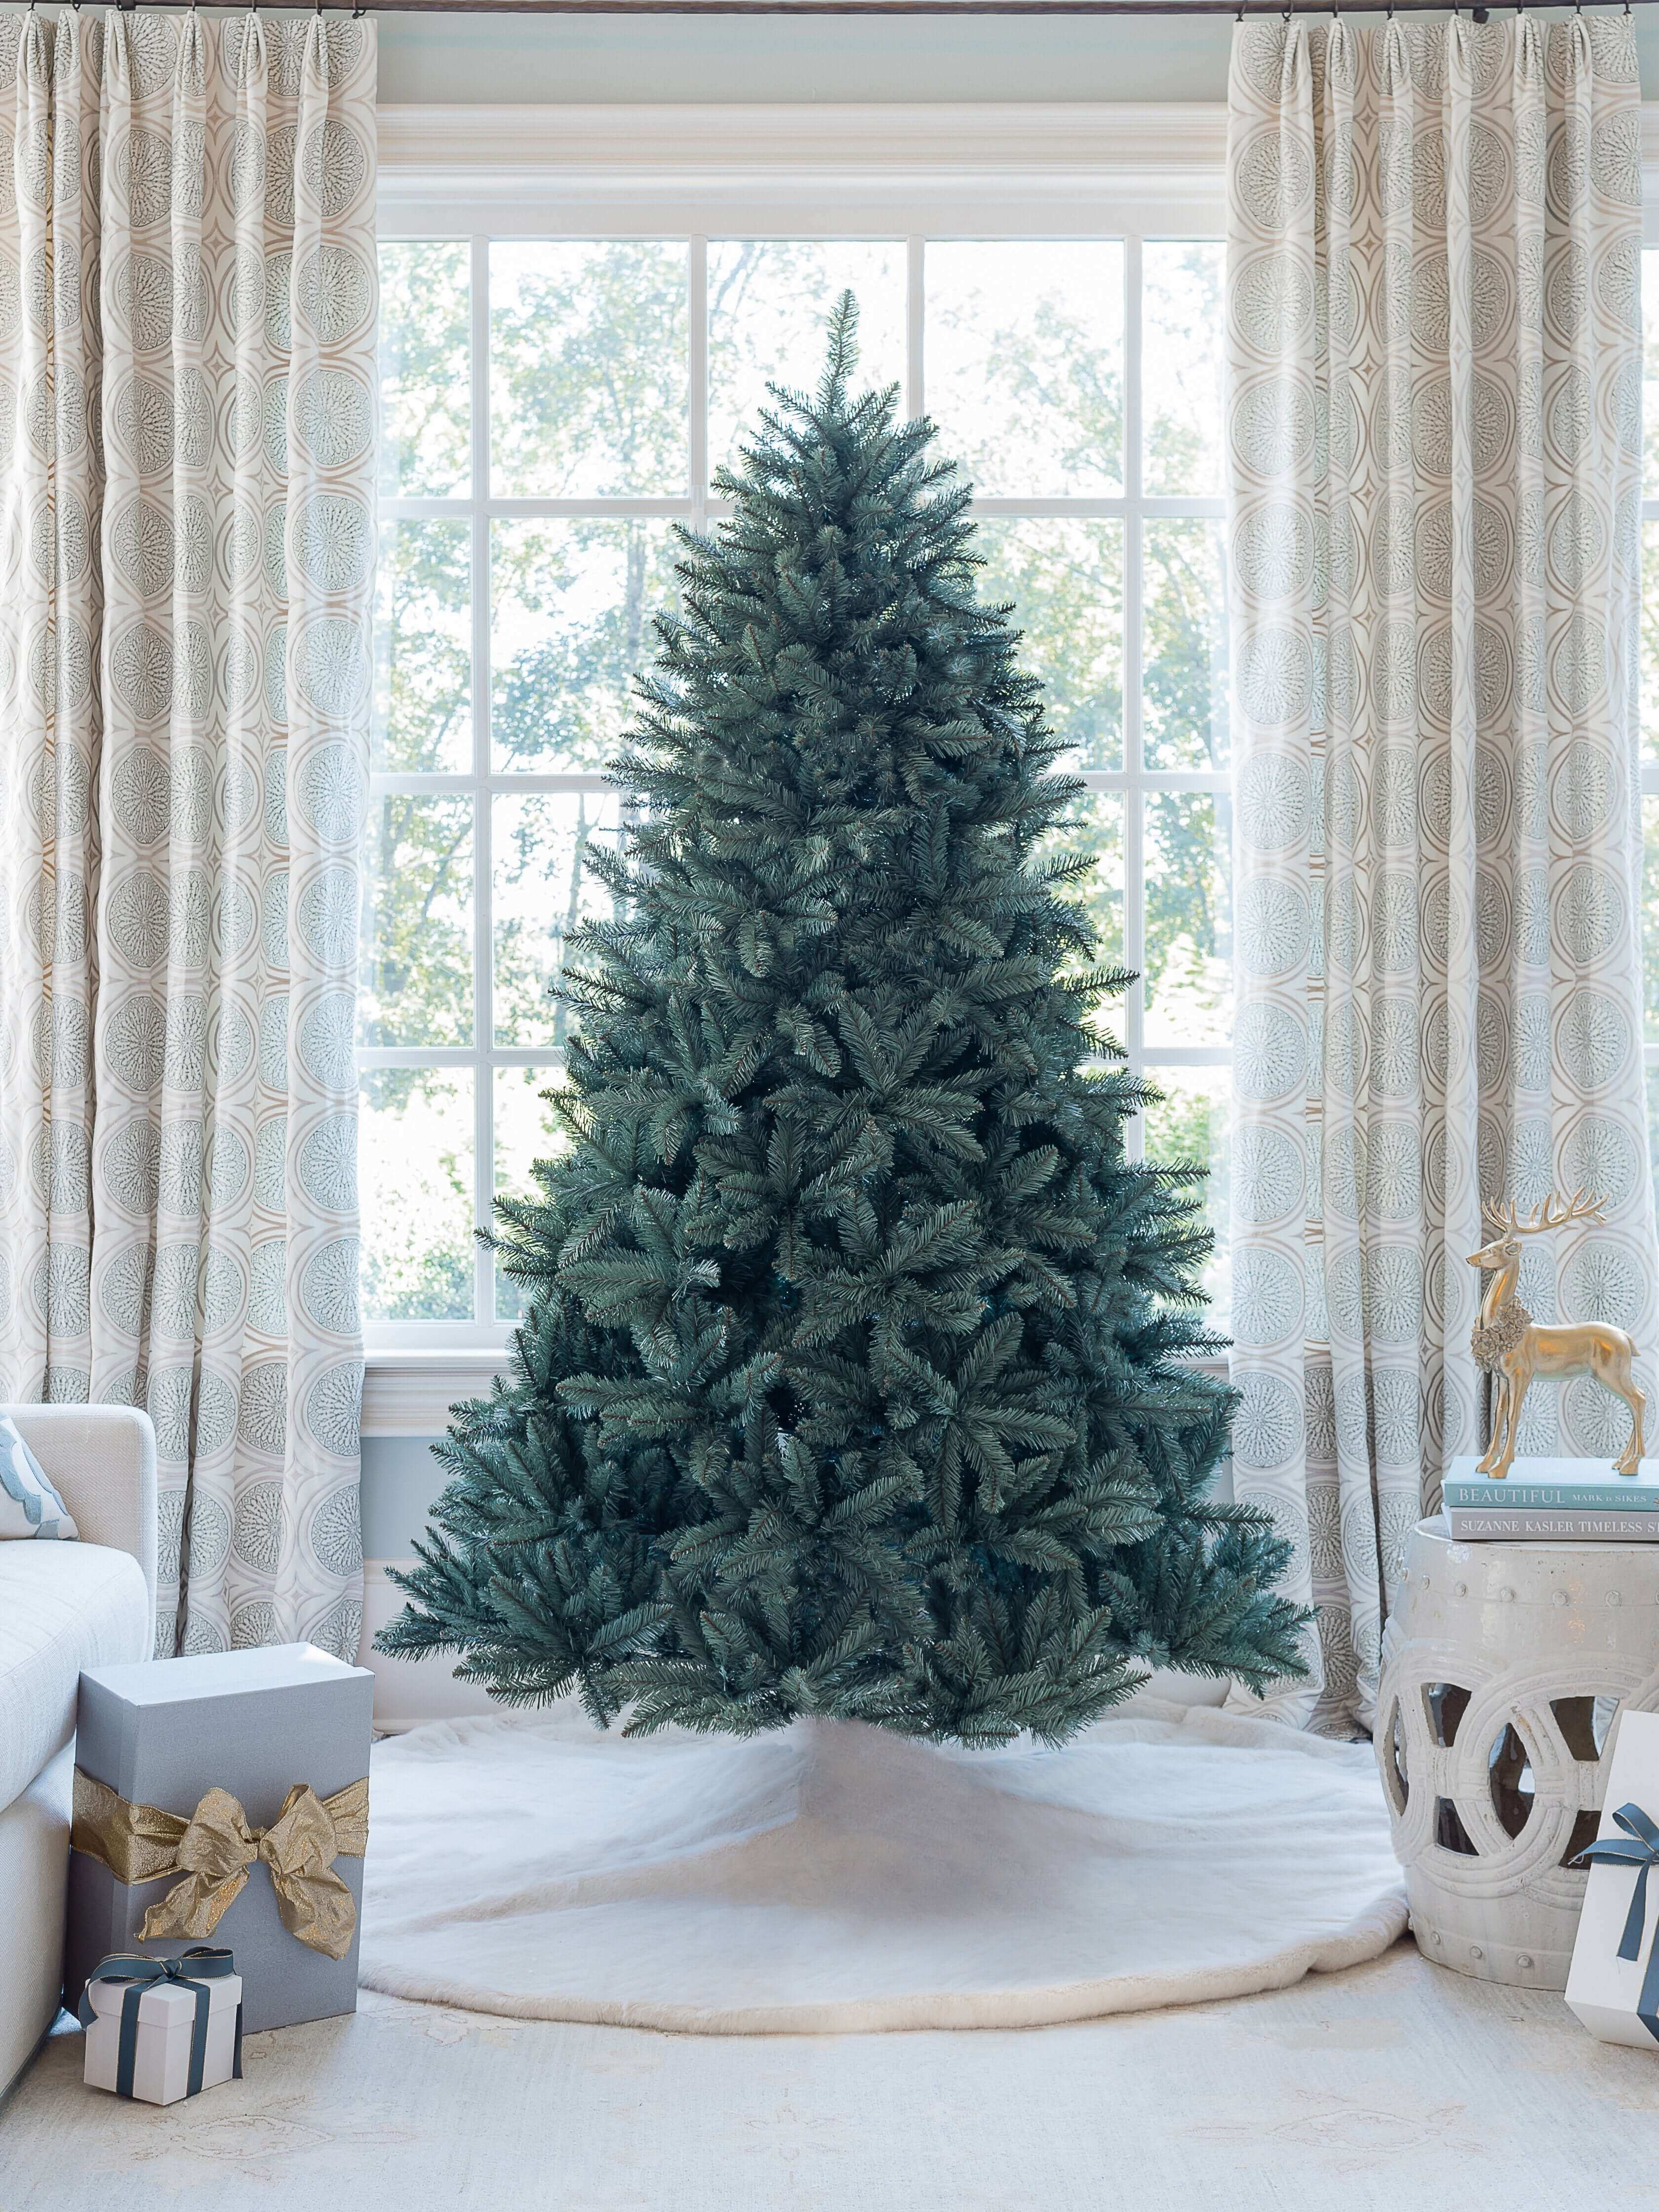 King of Christmas 8' Tribeca Spruce Blue Artificial Christmas Tree with 650 Warm White LED Lights